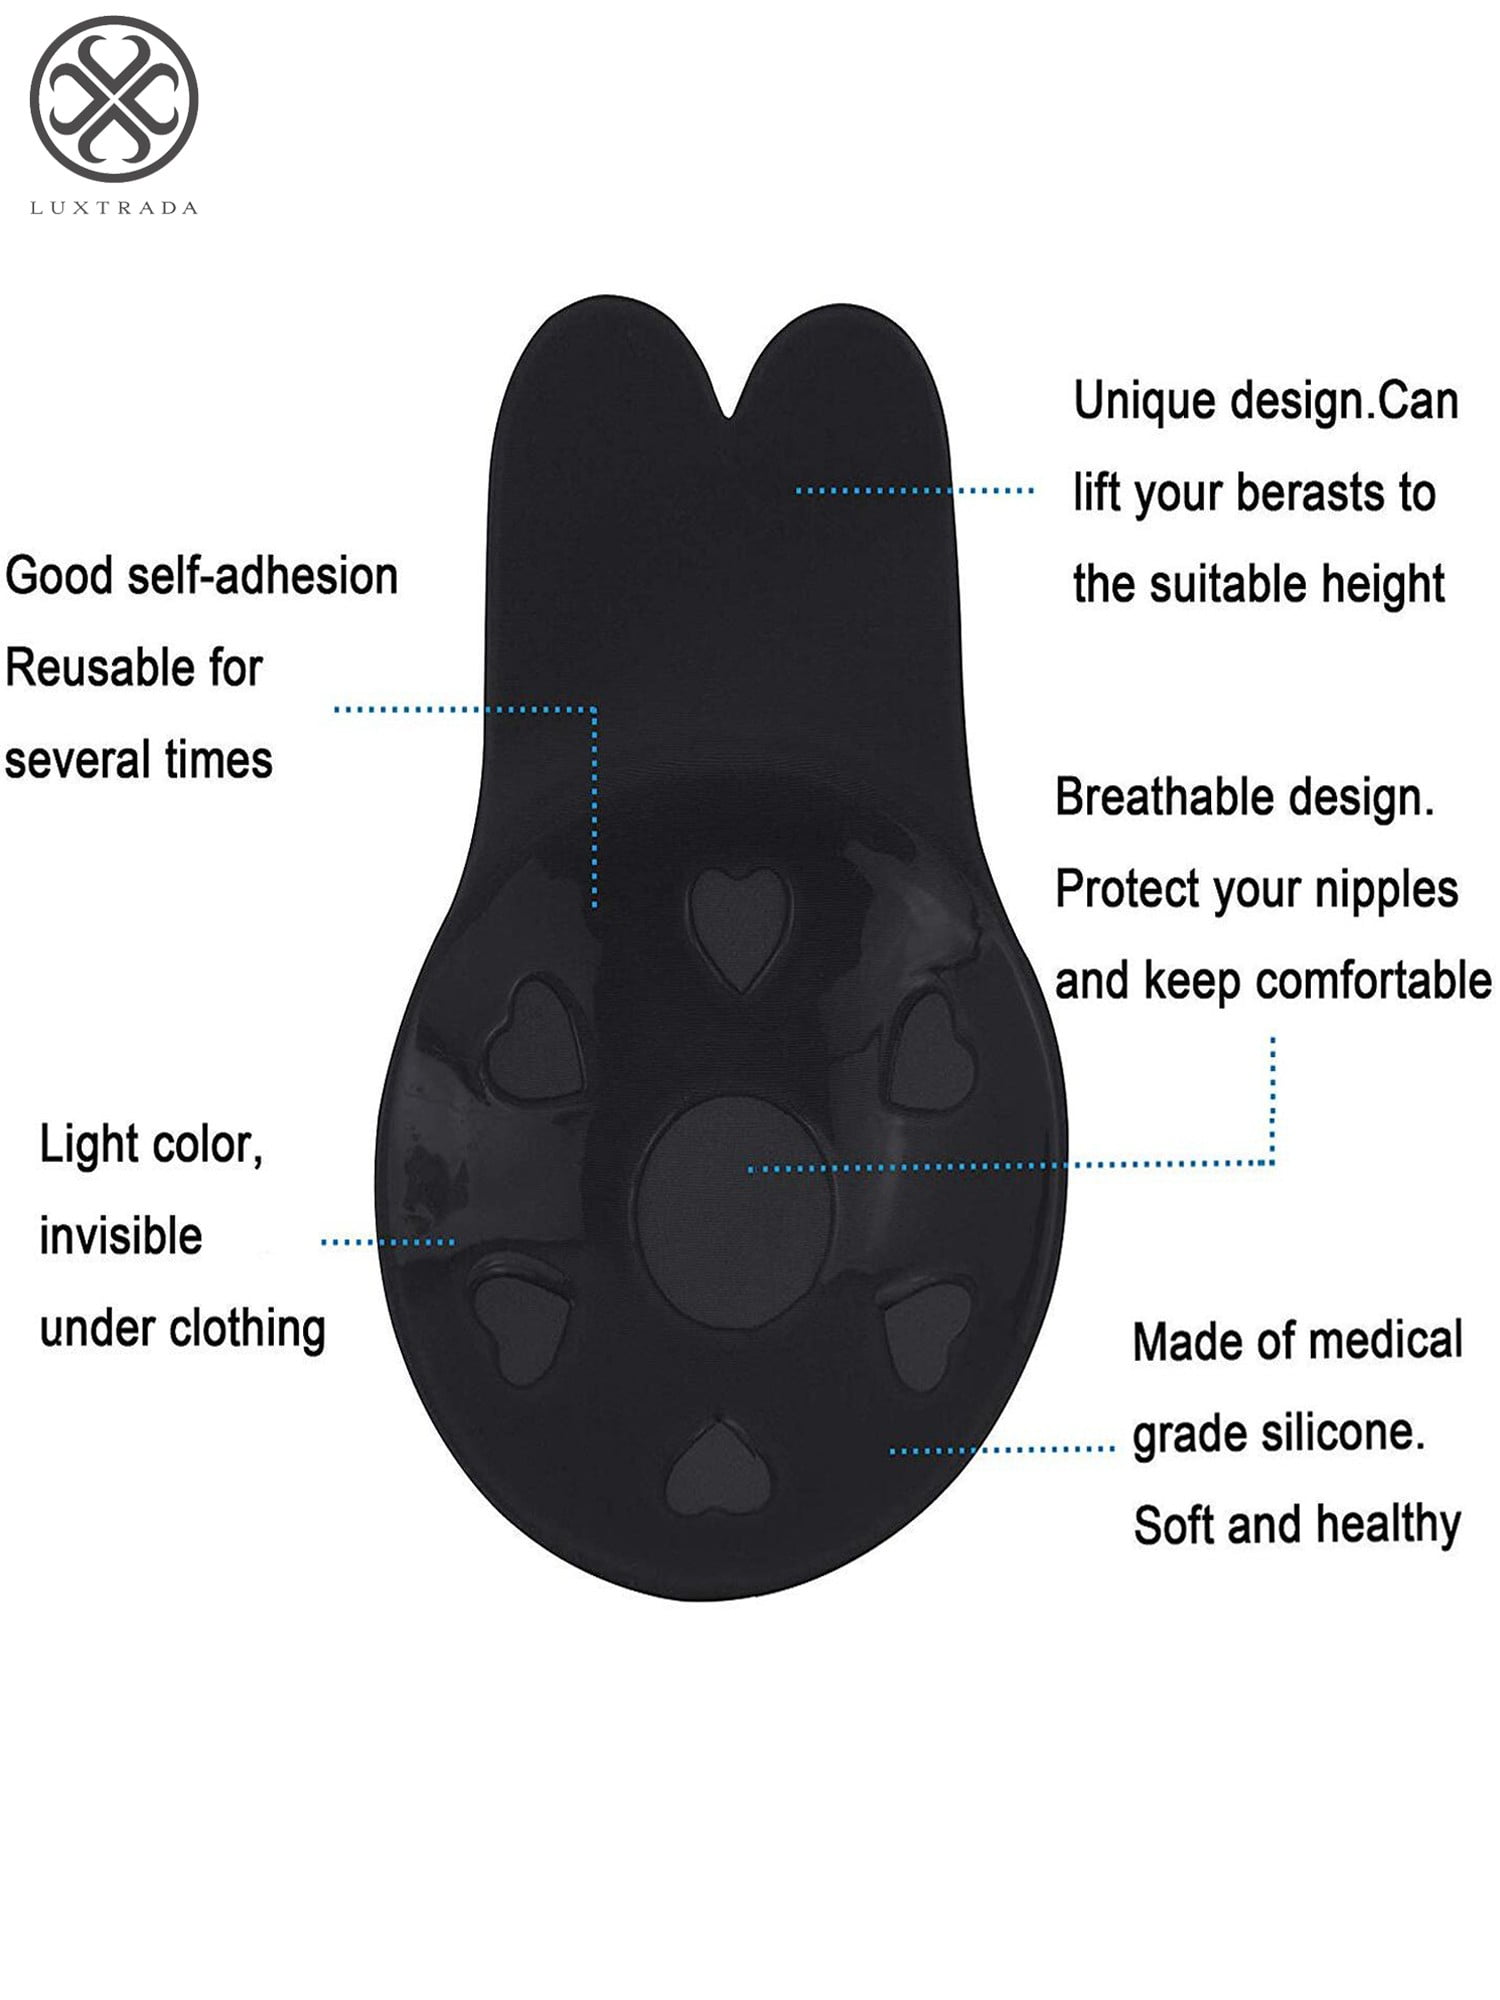 Up To 85% Off on 2 Pairs Rabbit Ear Invisible